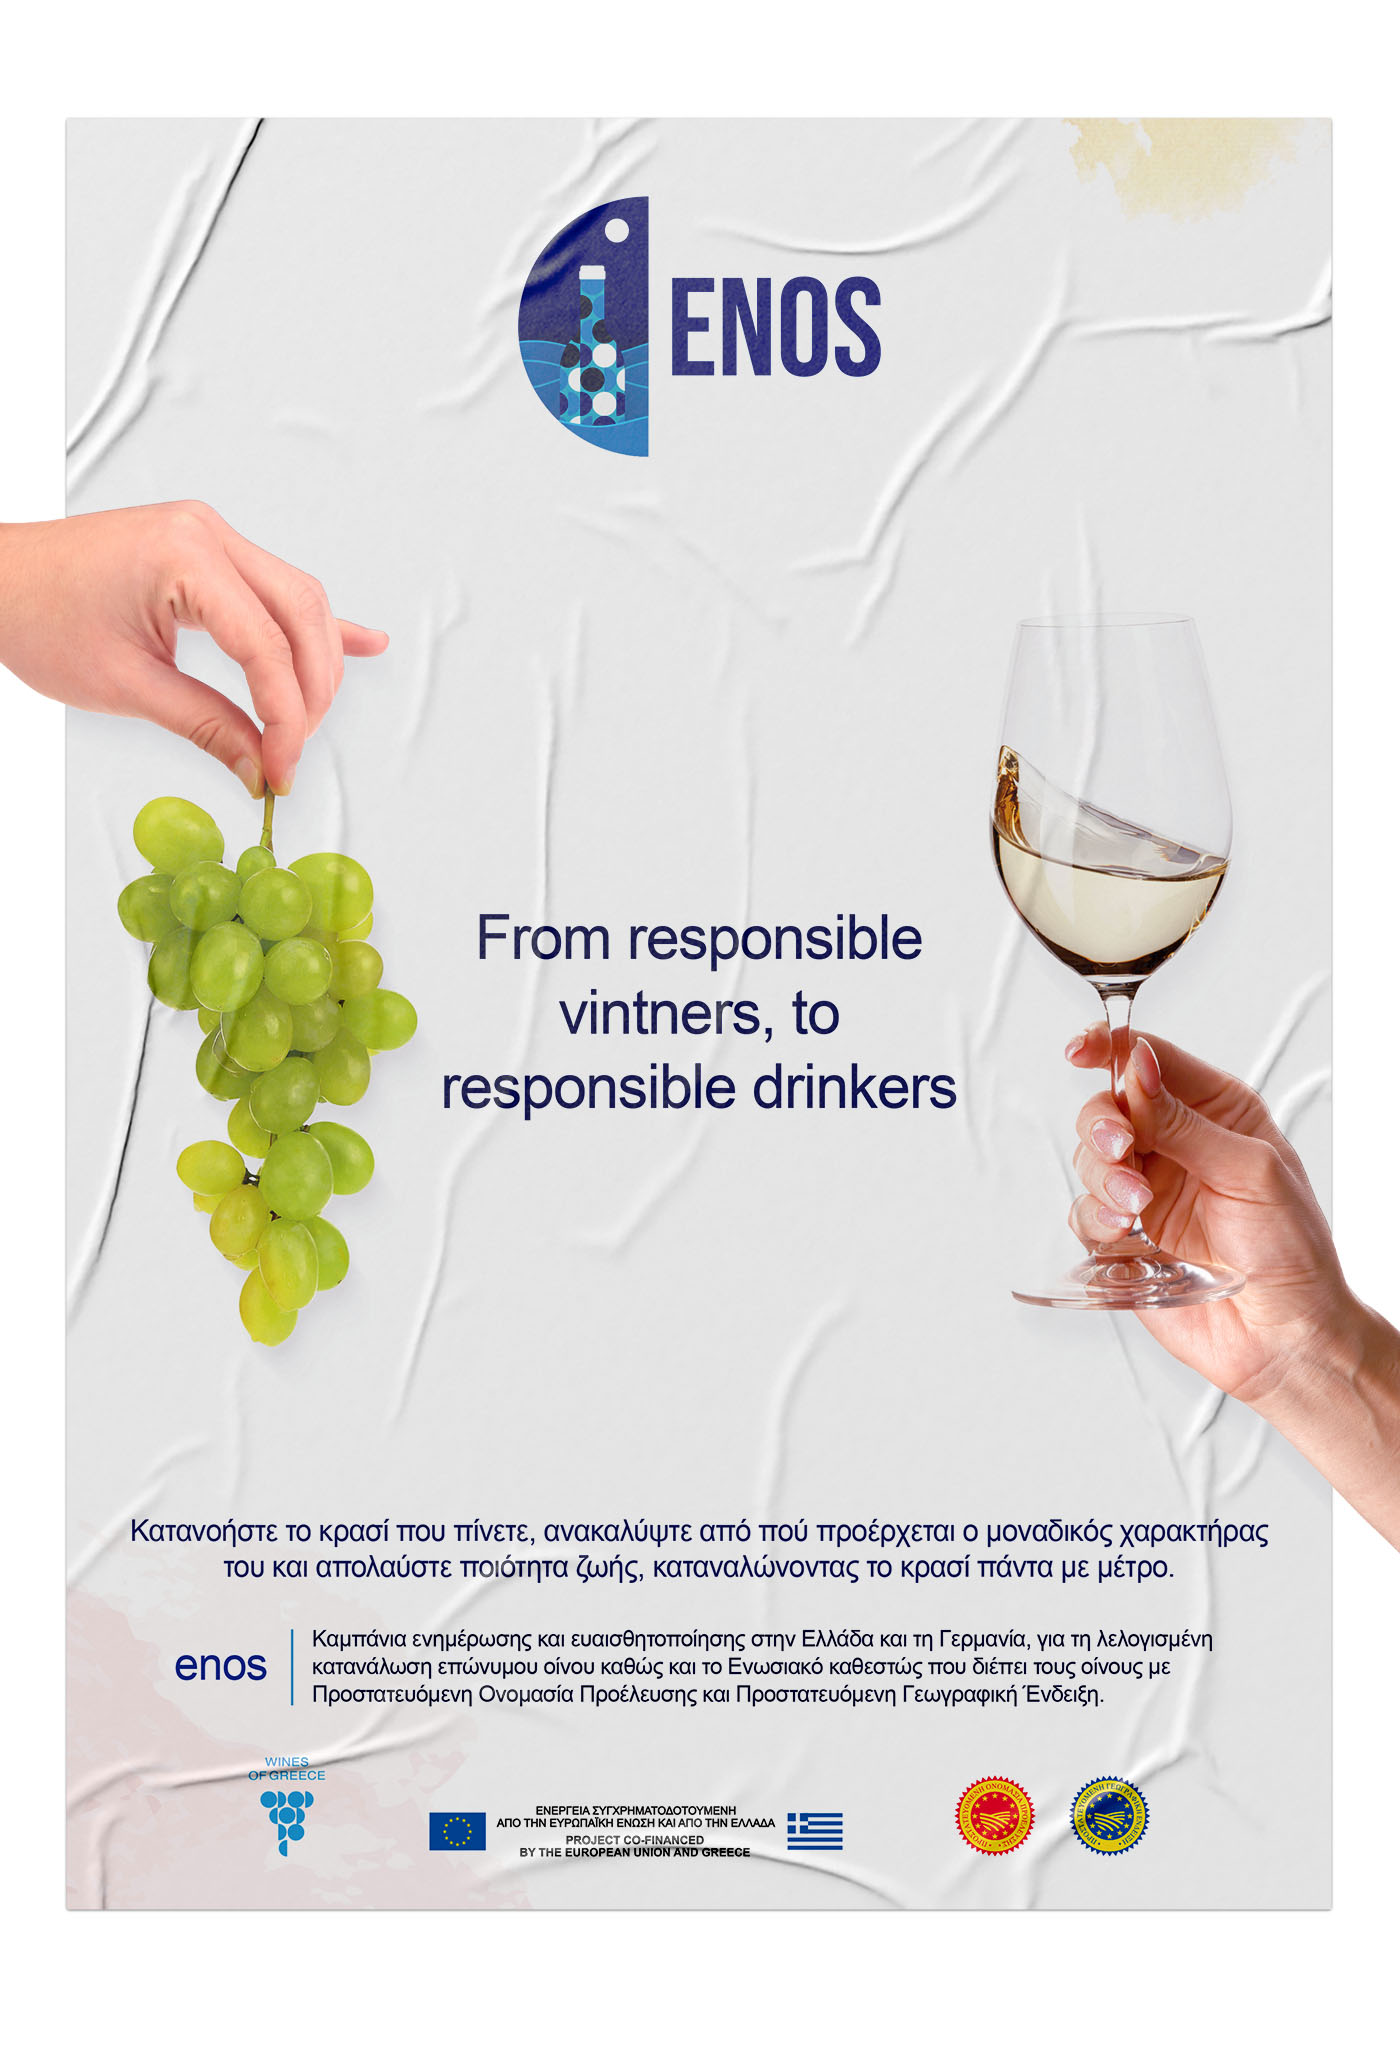 Enos Project Campaign Greece Extra Poster 1